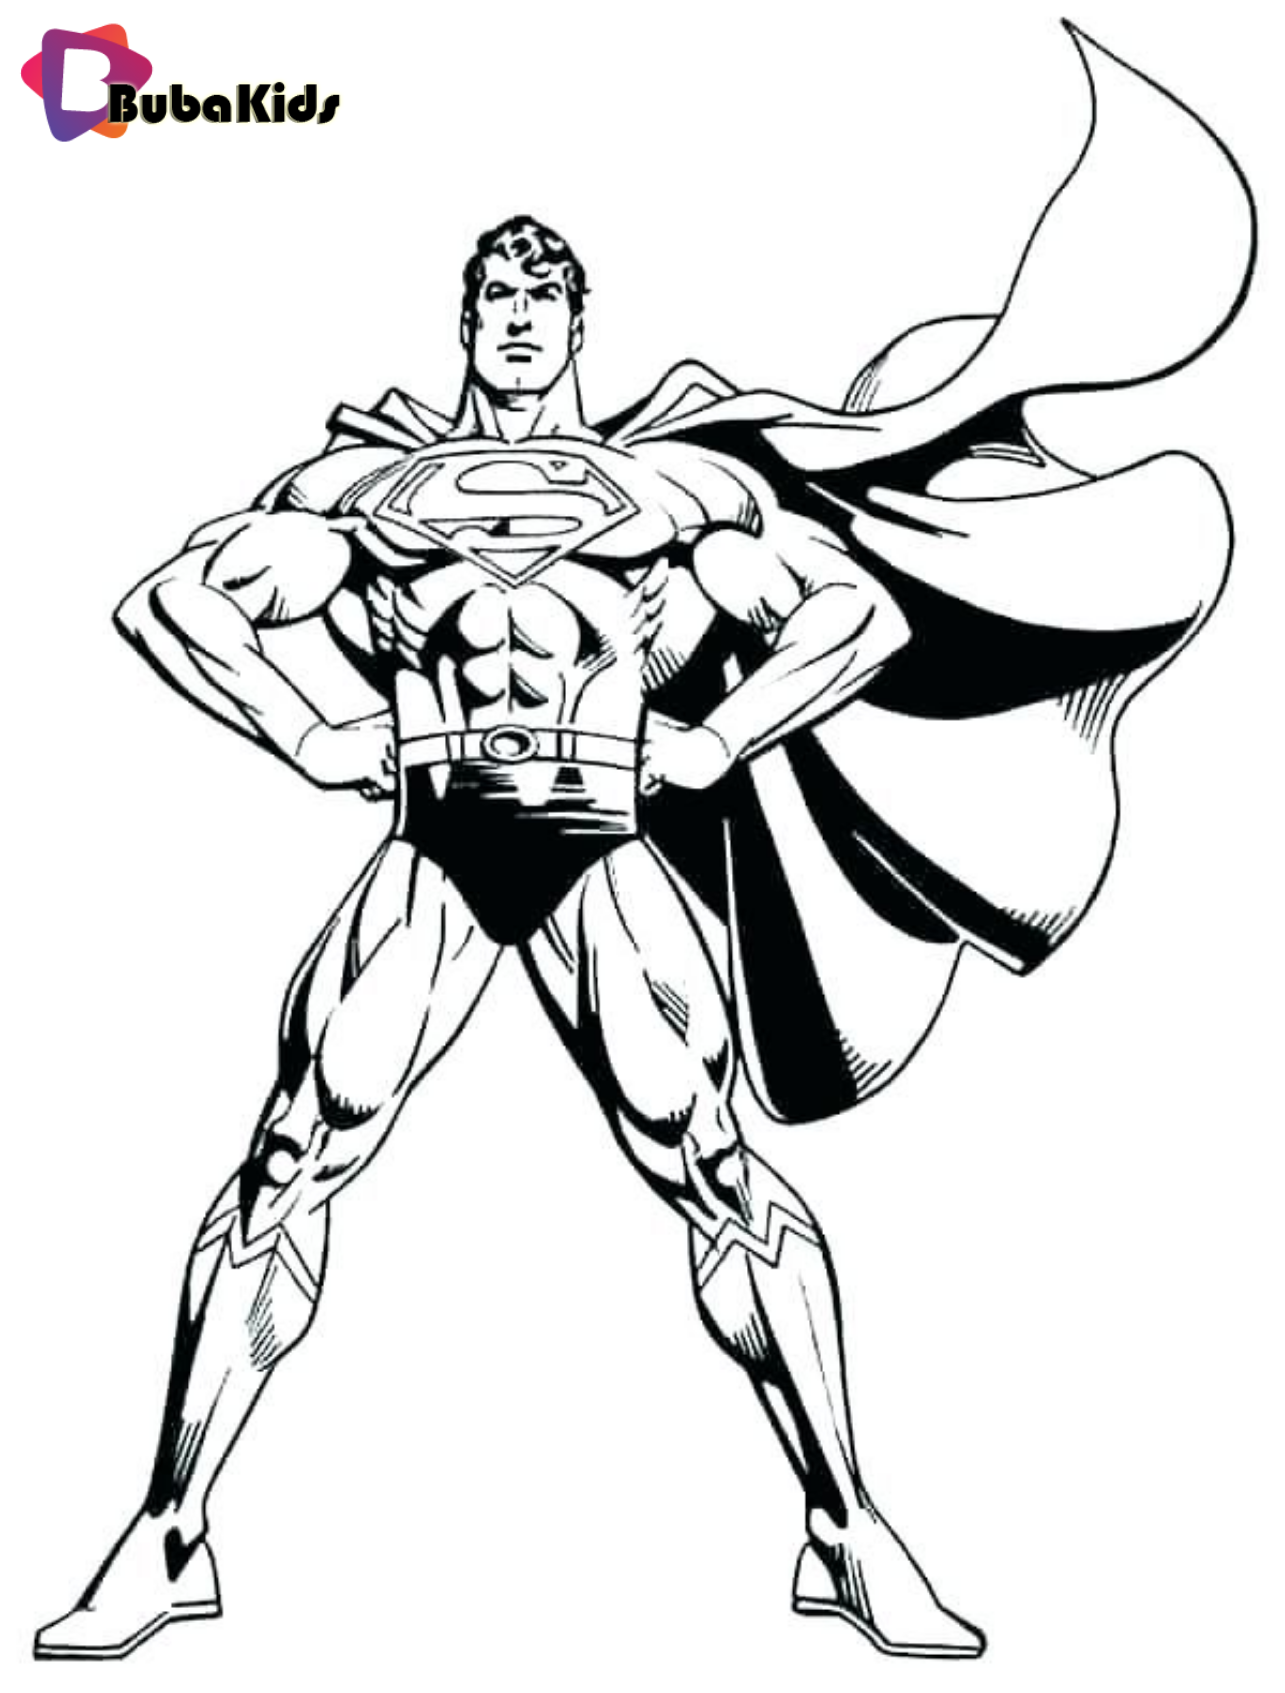 Superman coloring pages for kids – Printable Superman Coloring Pages Idea on bubakids.com